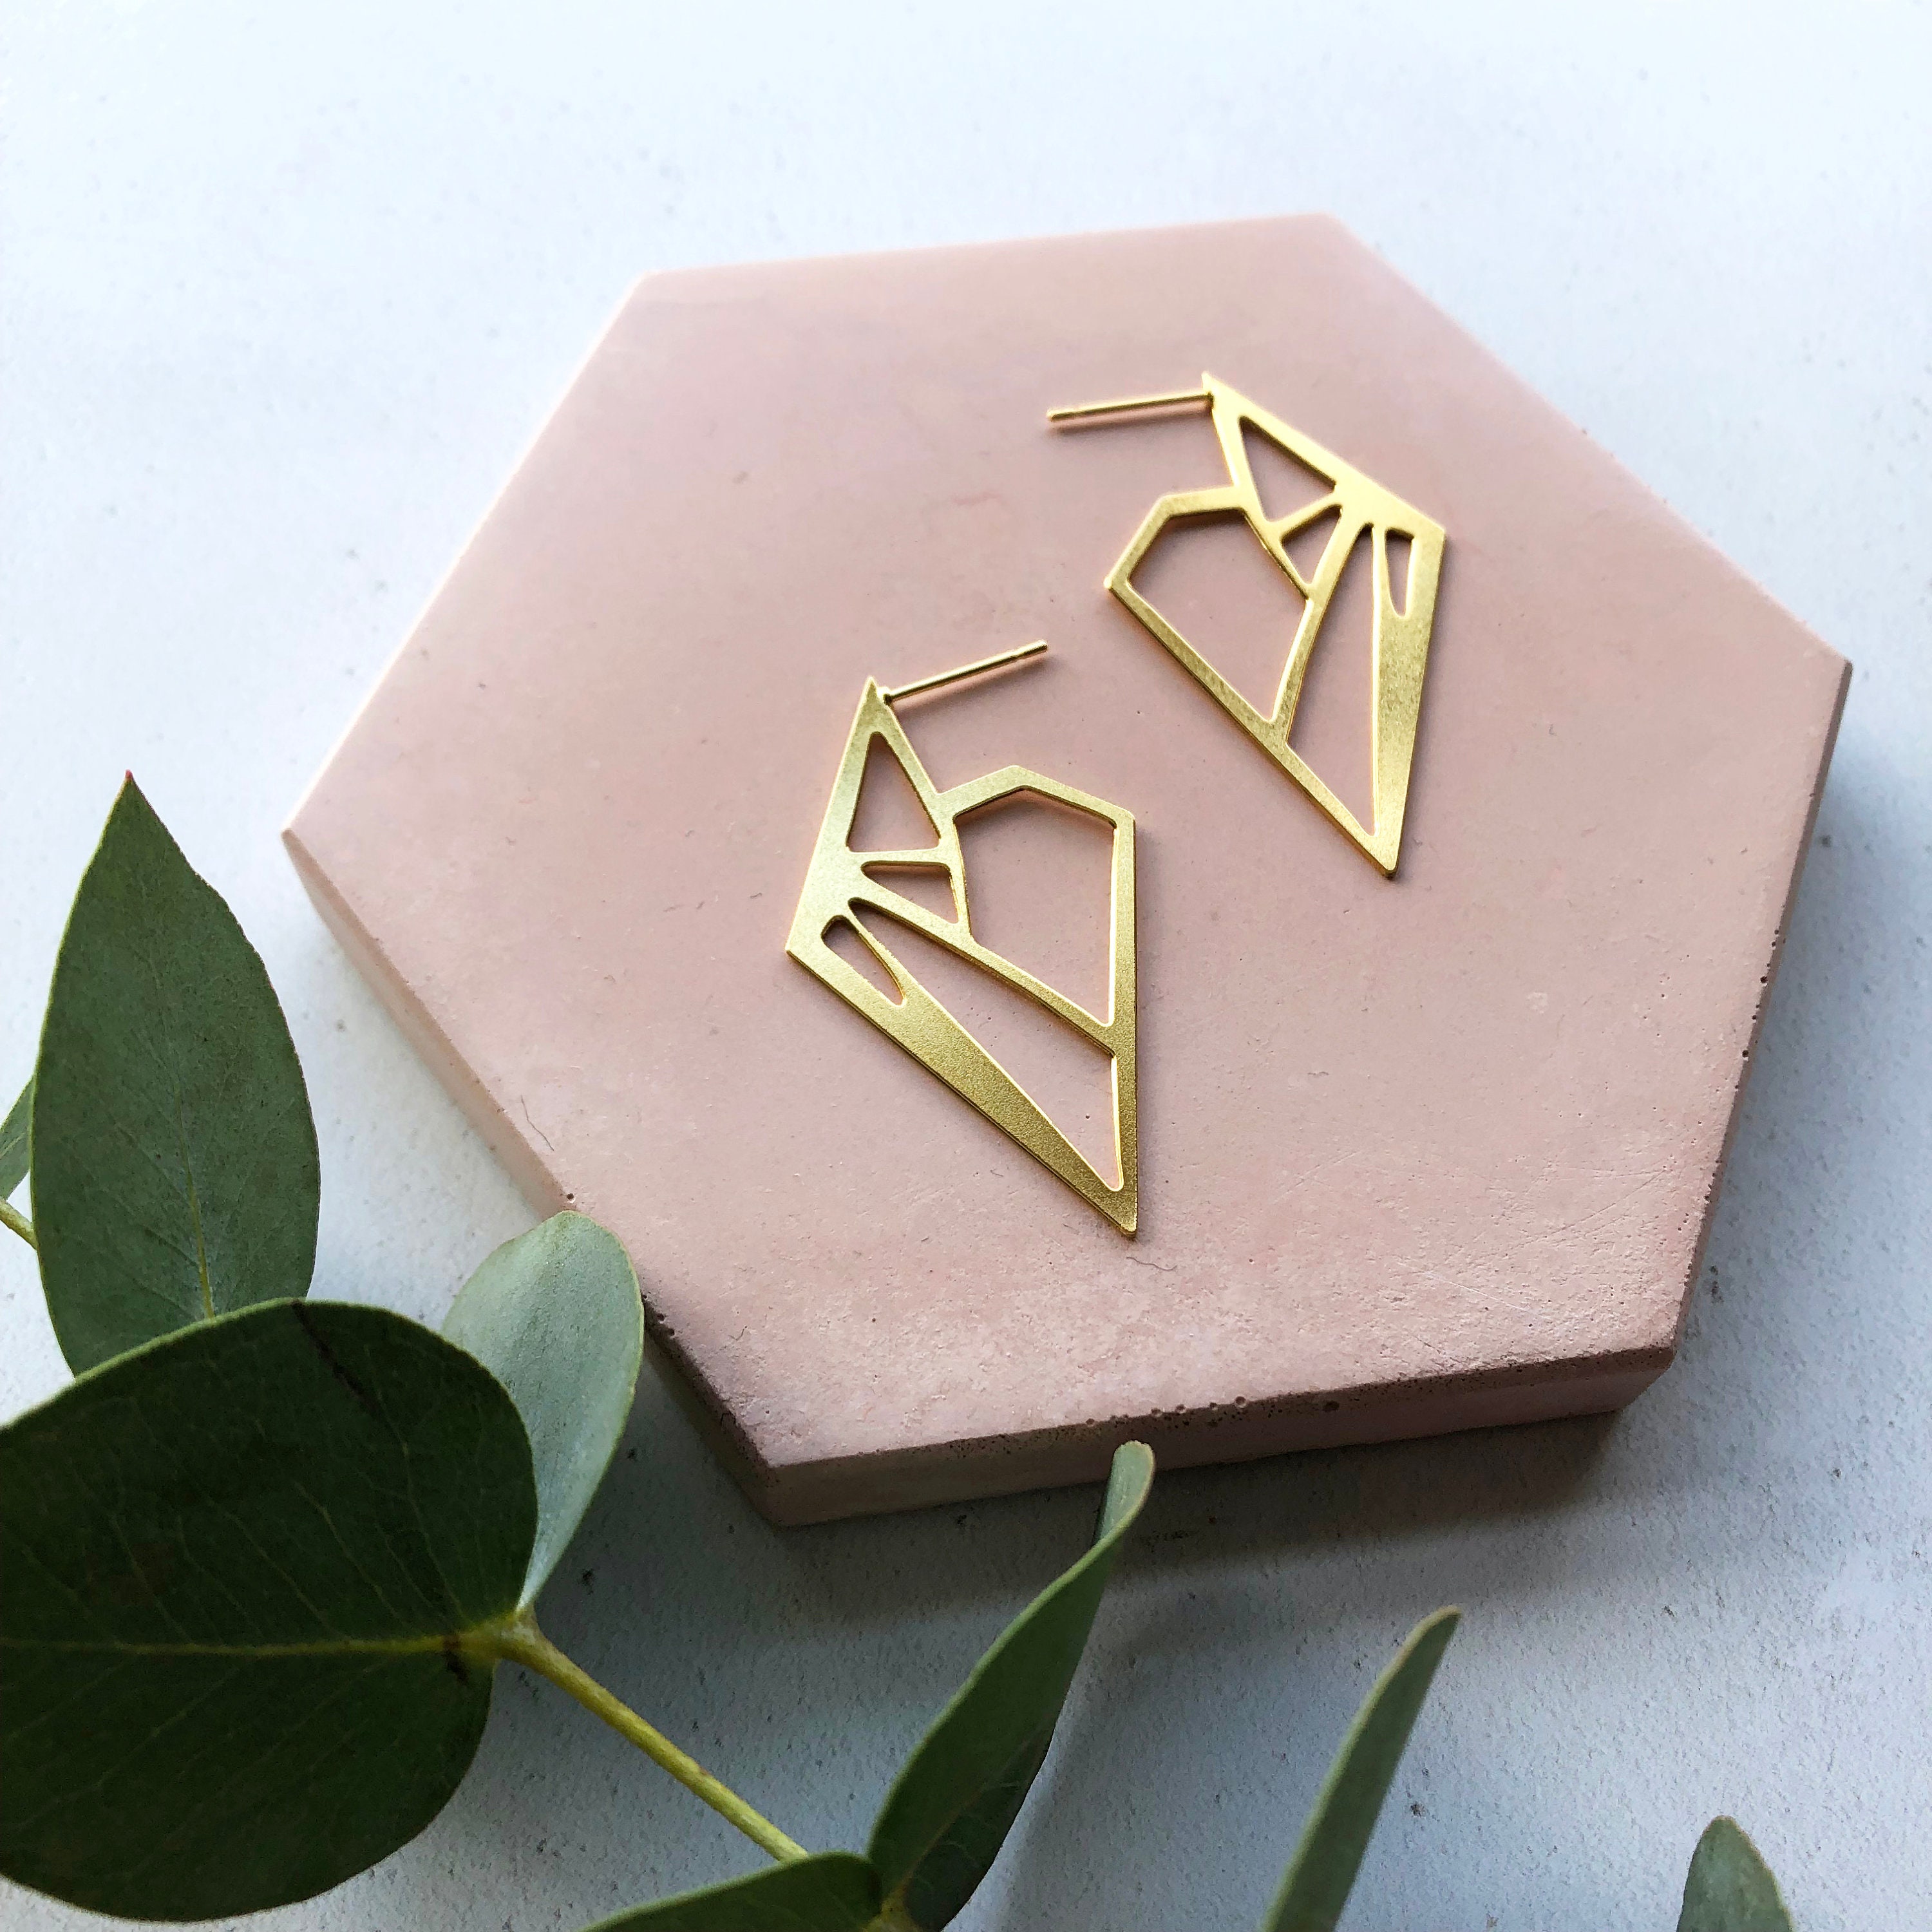 Statement Triangle Stud Earrings - Gift For Her Minimal Geometric Studs Gold